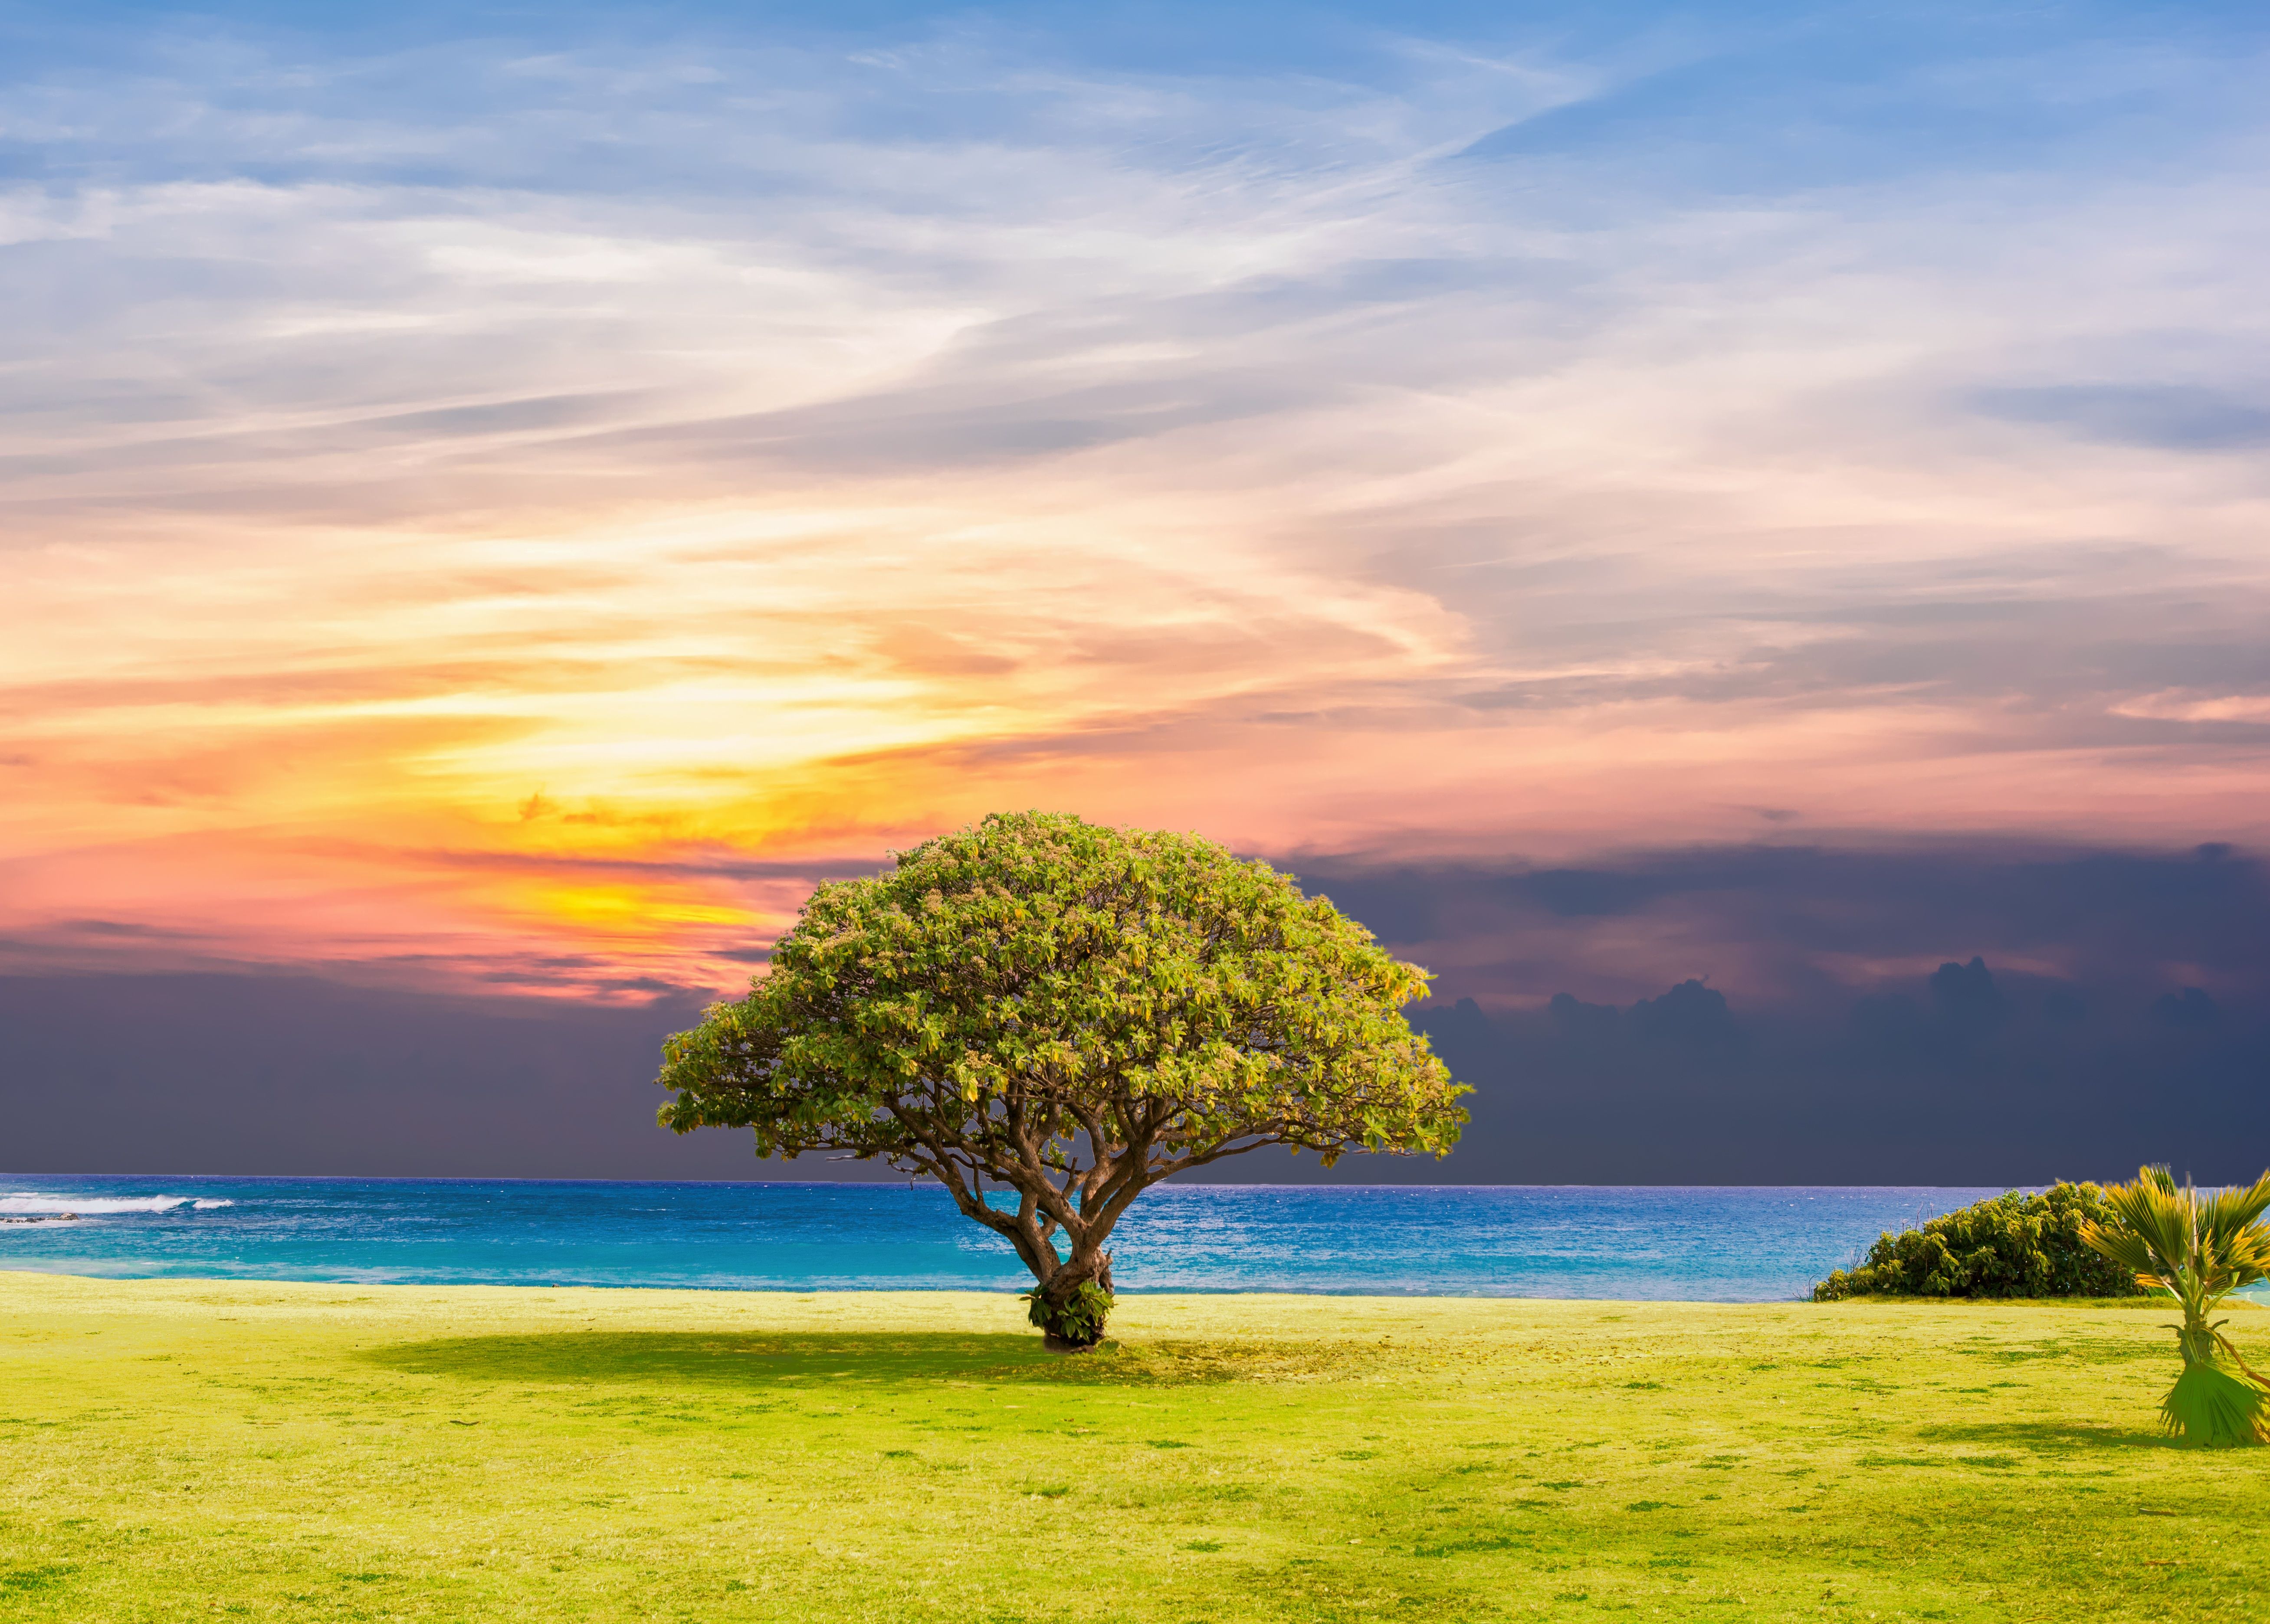 Ocean Summer Tree Landscape 5k 1280x1024 Resolution HD 4k Wallpaper, Image, Background, Photo and Picture